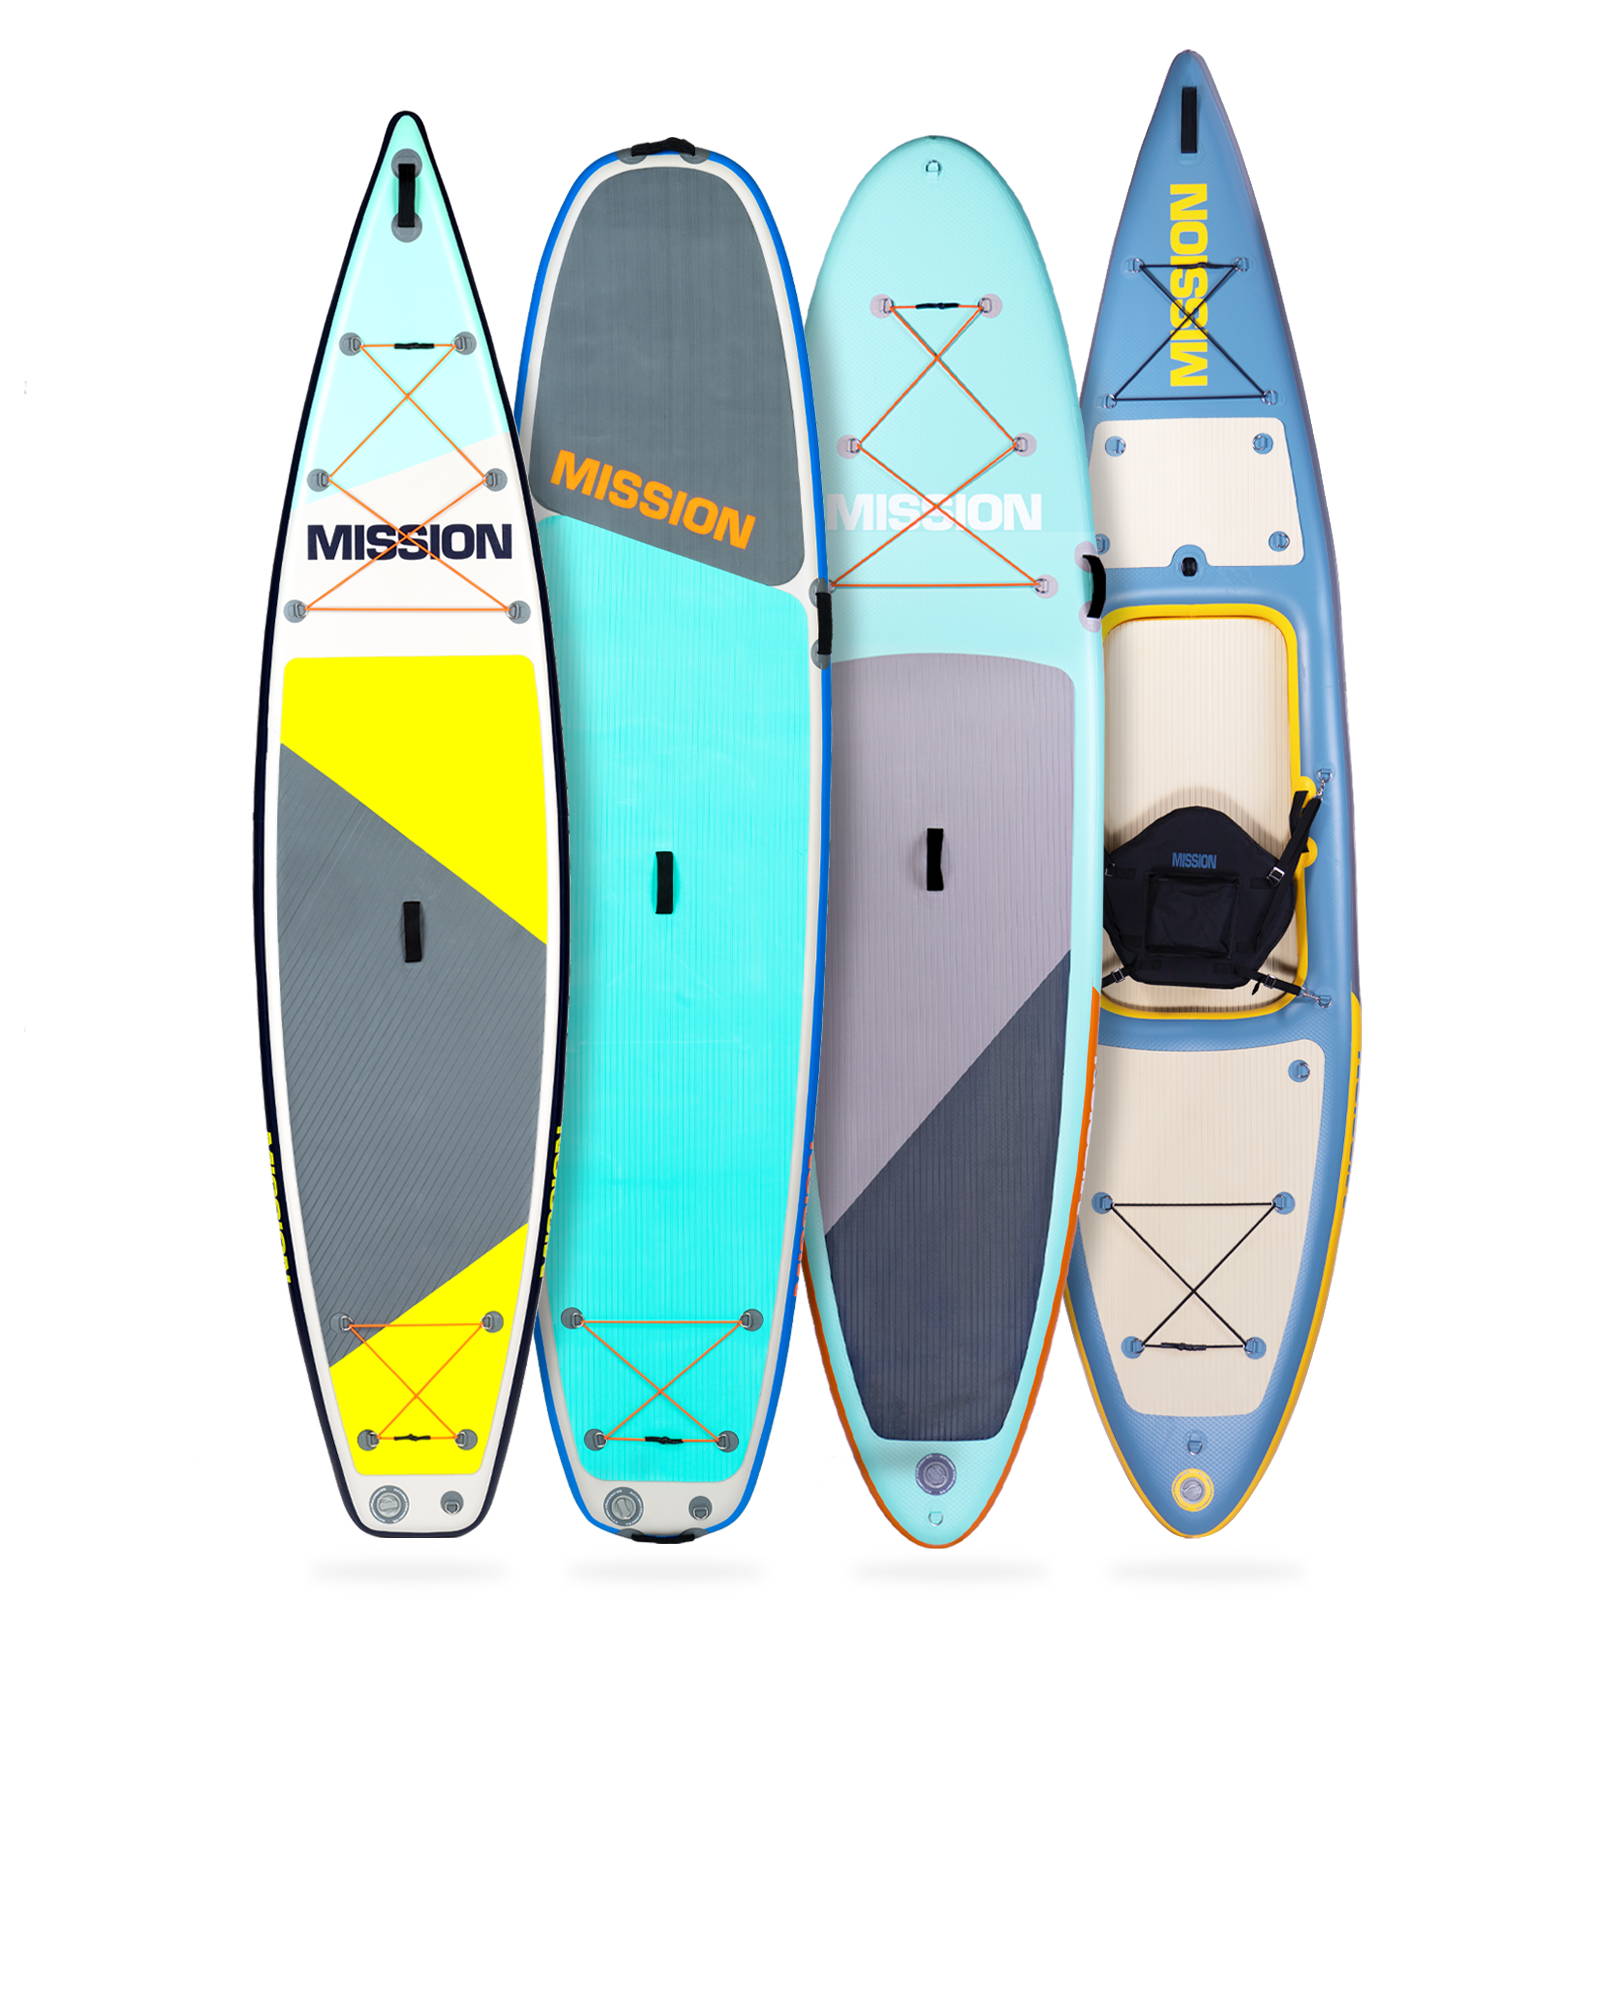 MISSIONS line of inflatable stand up paddle boards.